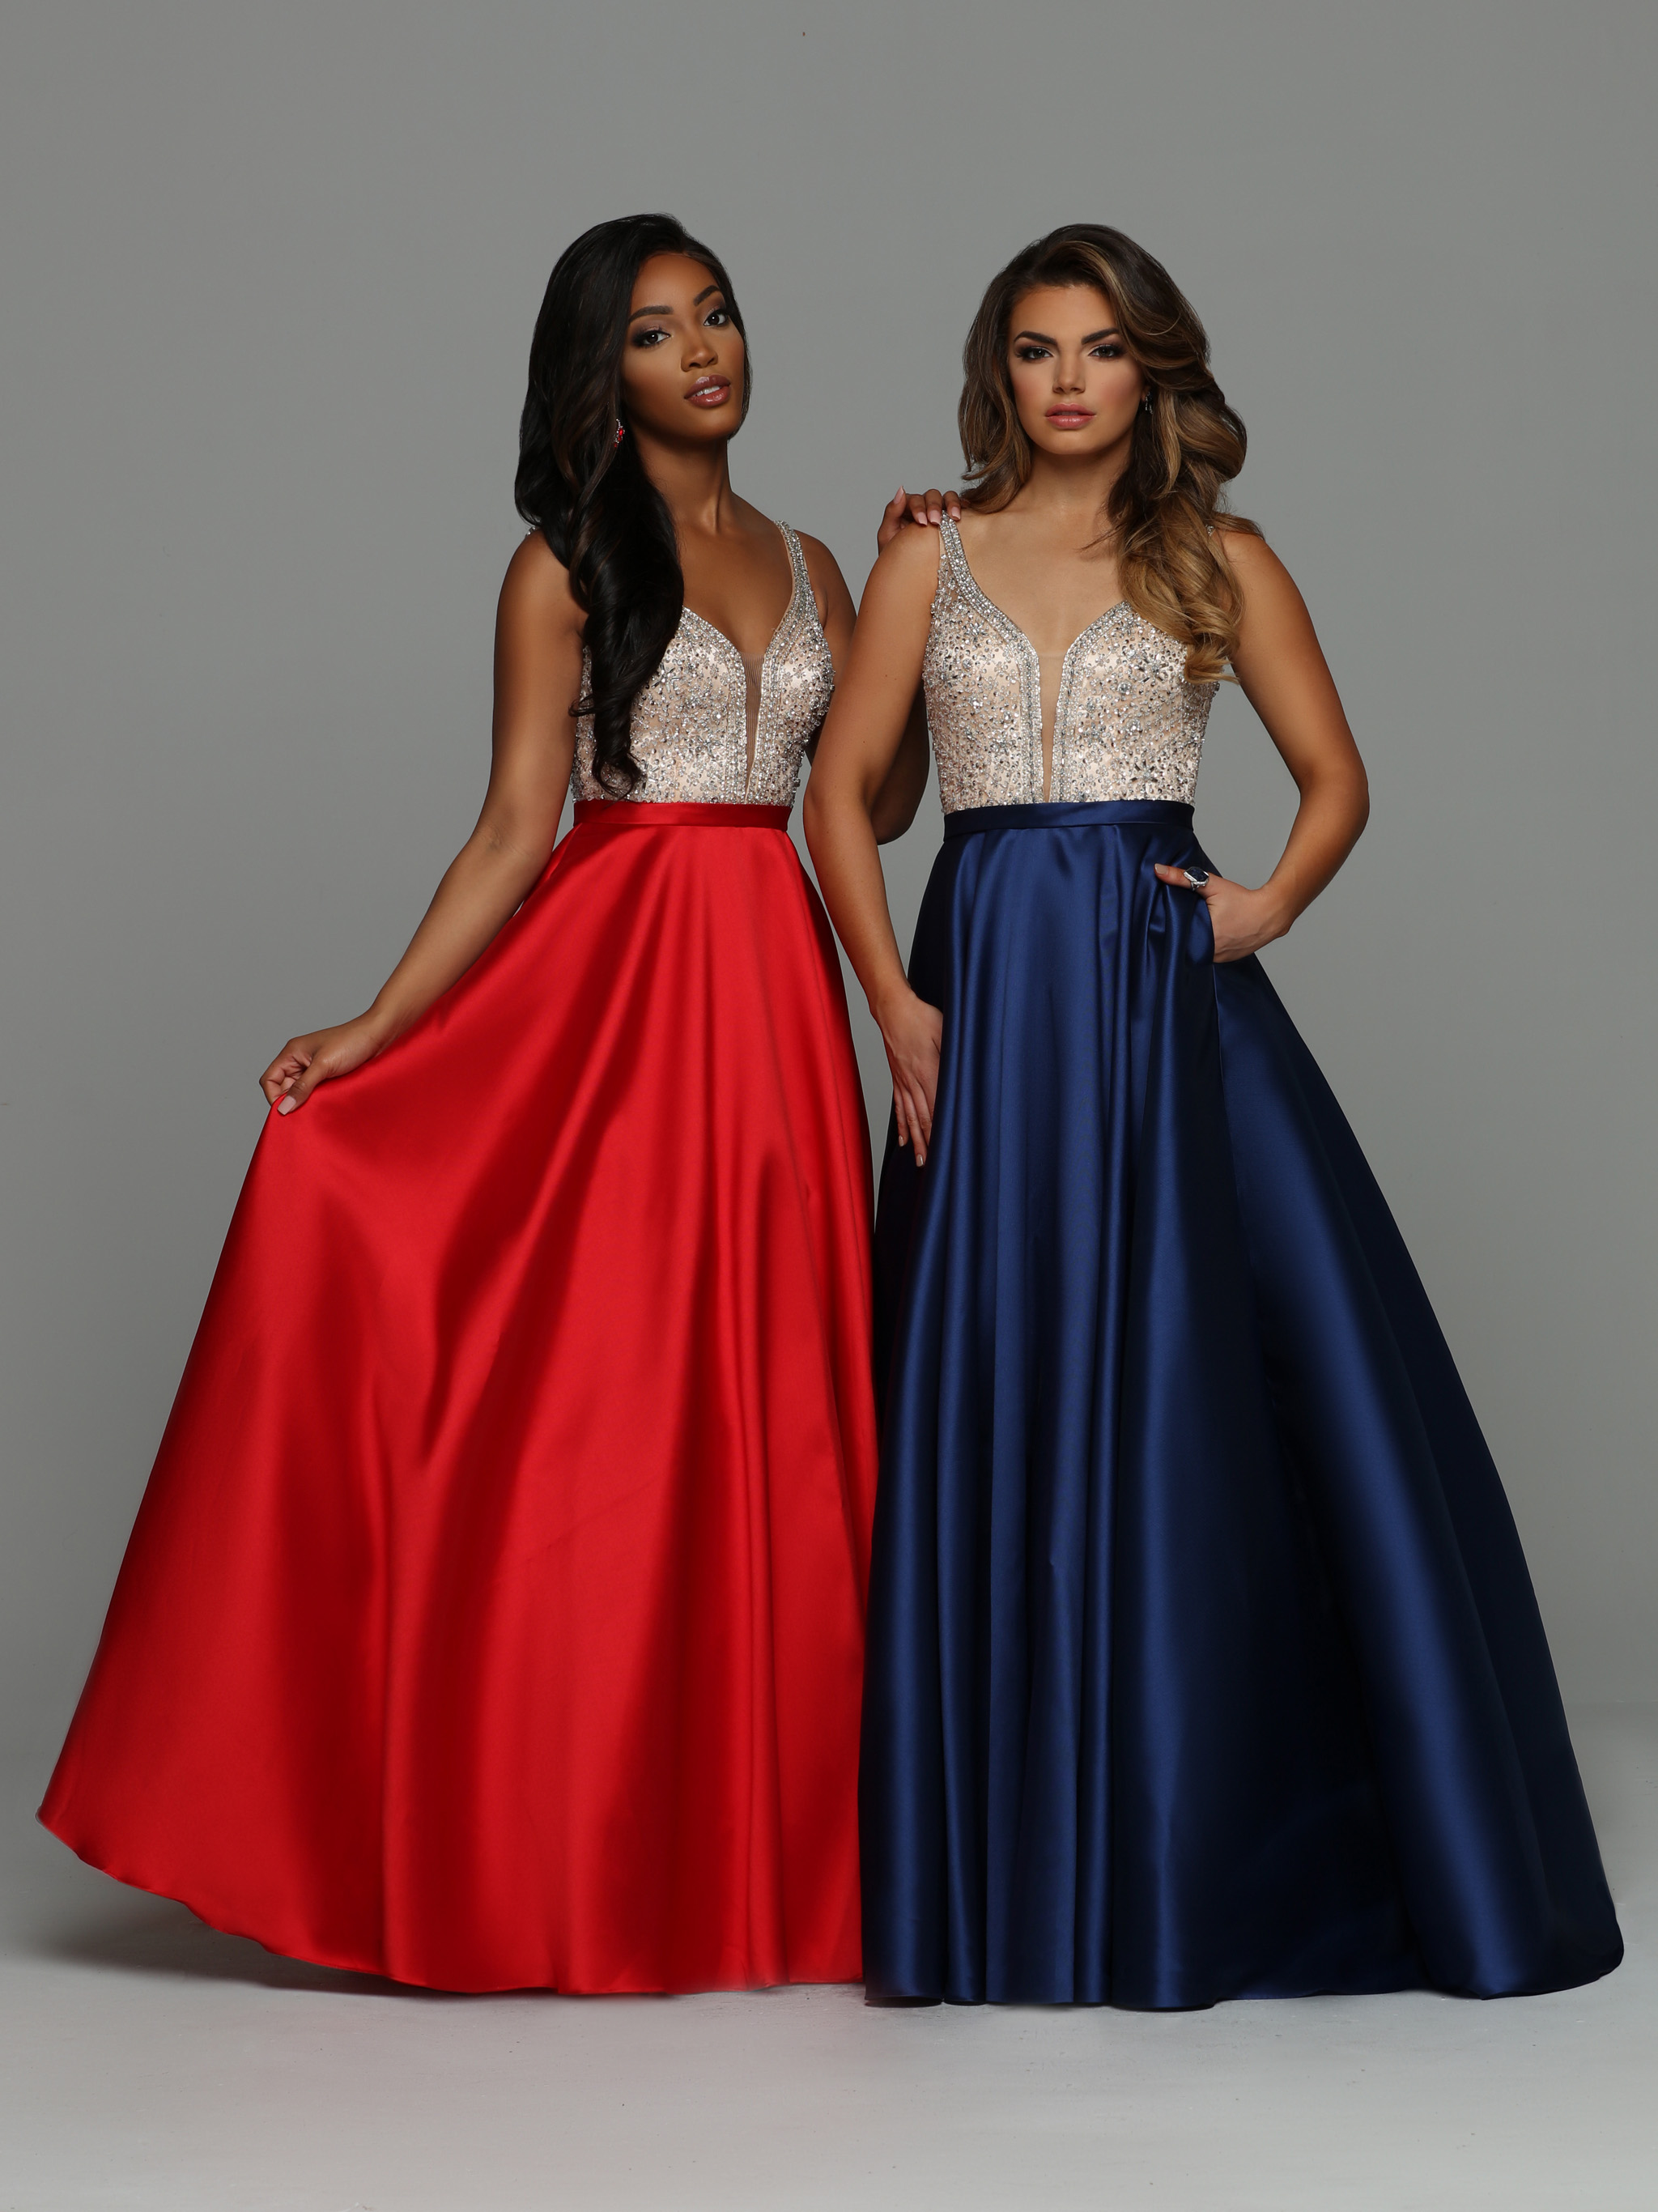 Top Prom Dress 2019 Ball Gown Prom Dresses – Sparkle Prom Blog - Sparkle Prom blog